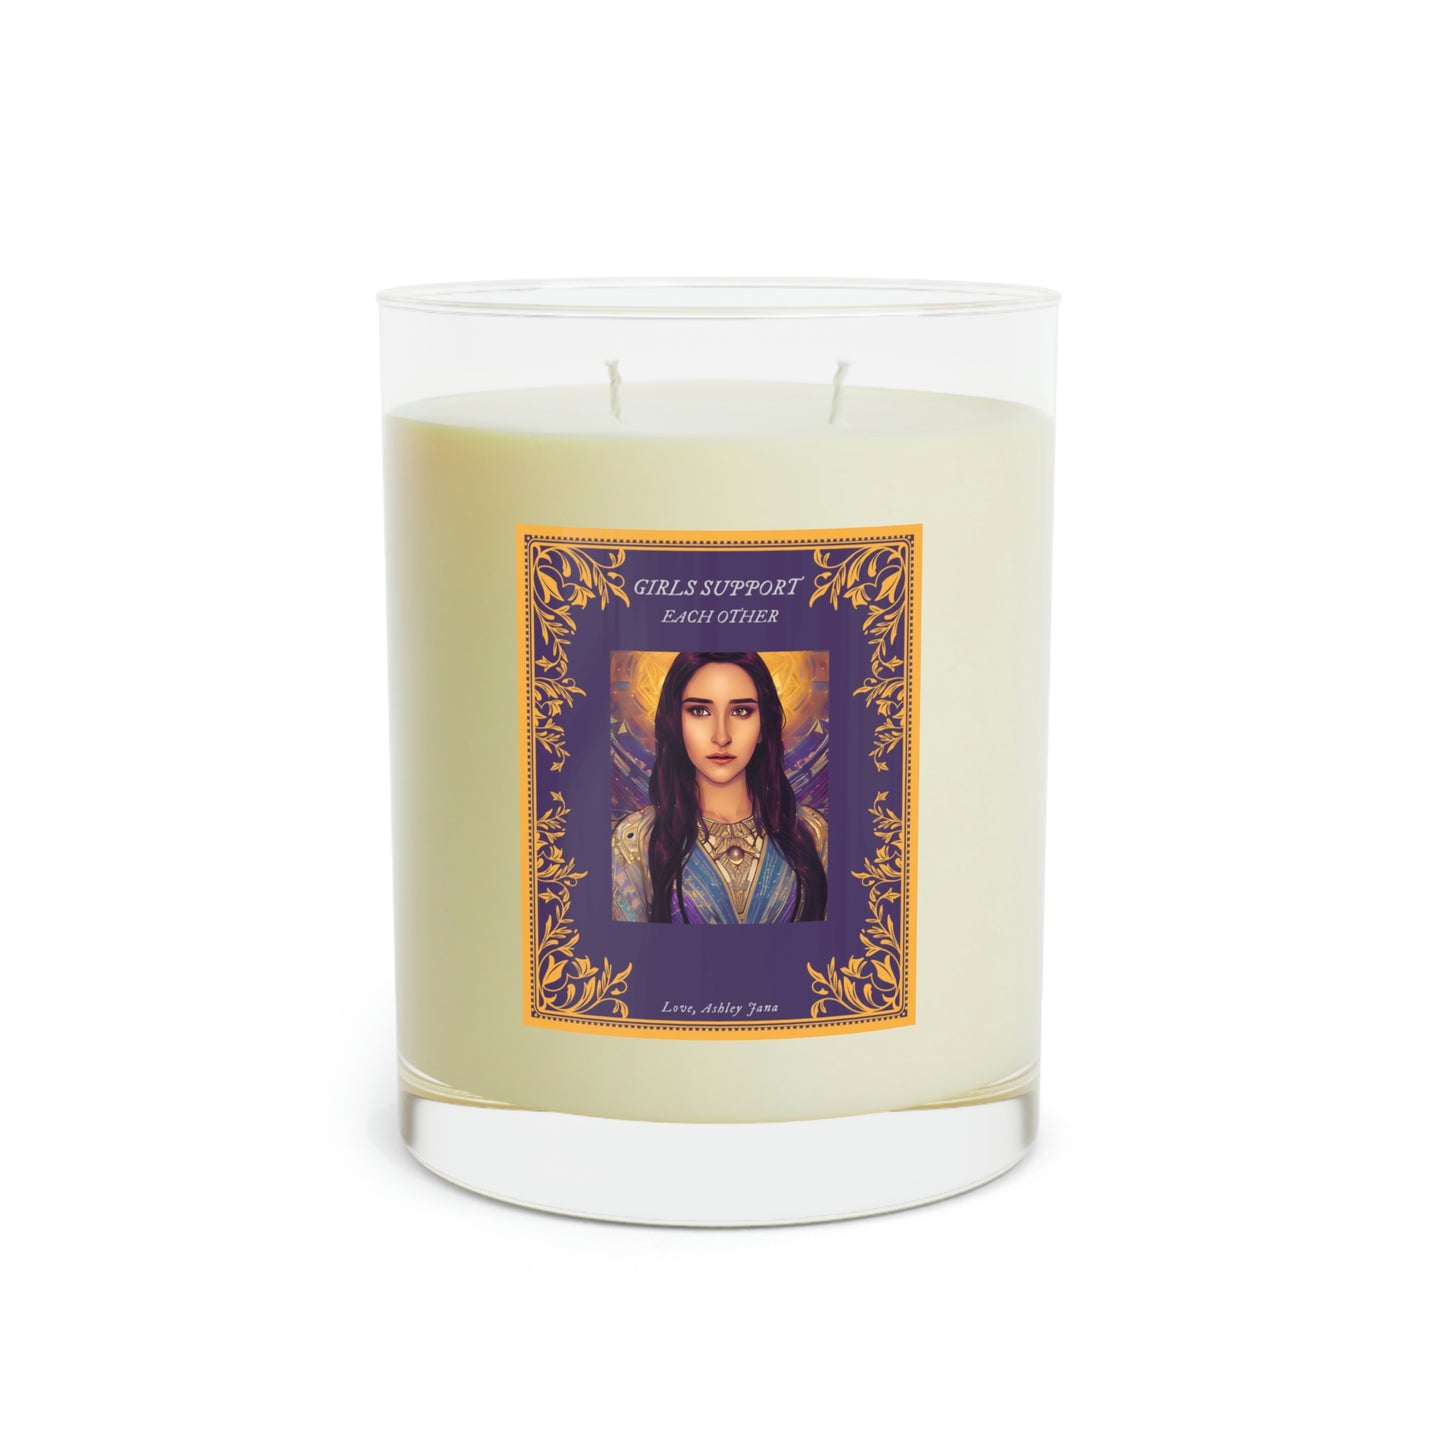 Girls Support Each Other Scented Candle - Full Glass, 11oz